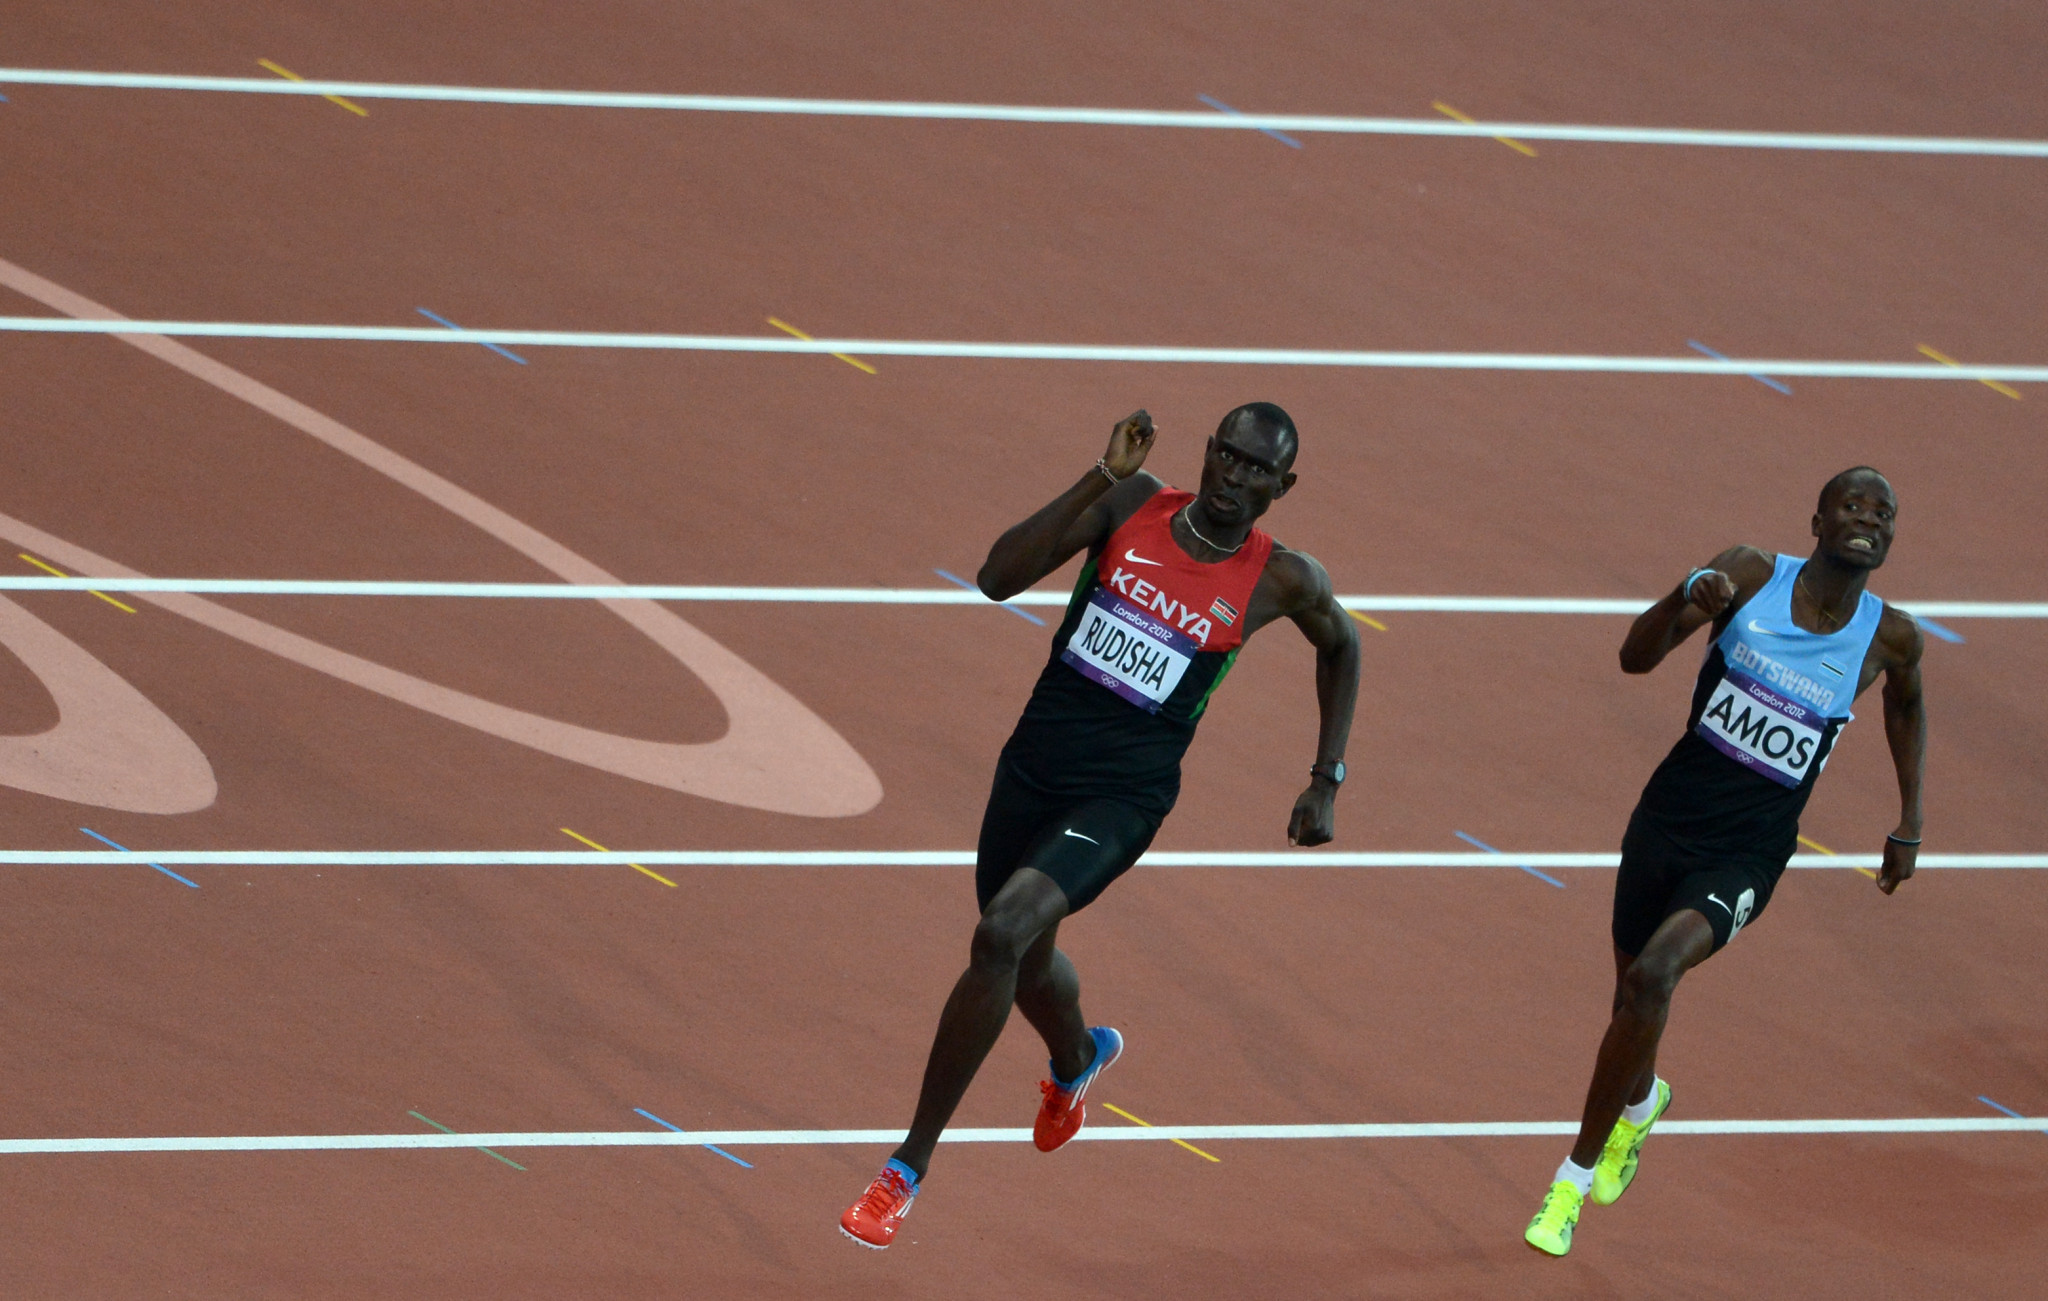 Nijel Amos won silver in the men's 800 metres final at London 2012 behind David Rudisha of Kenya in one of the greatest races of the modern era ©Getty Images